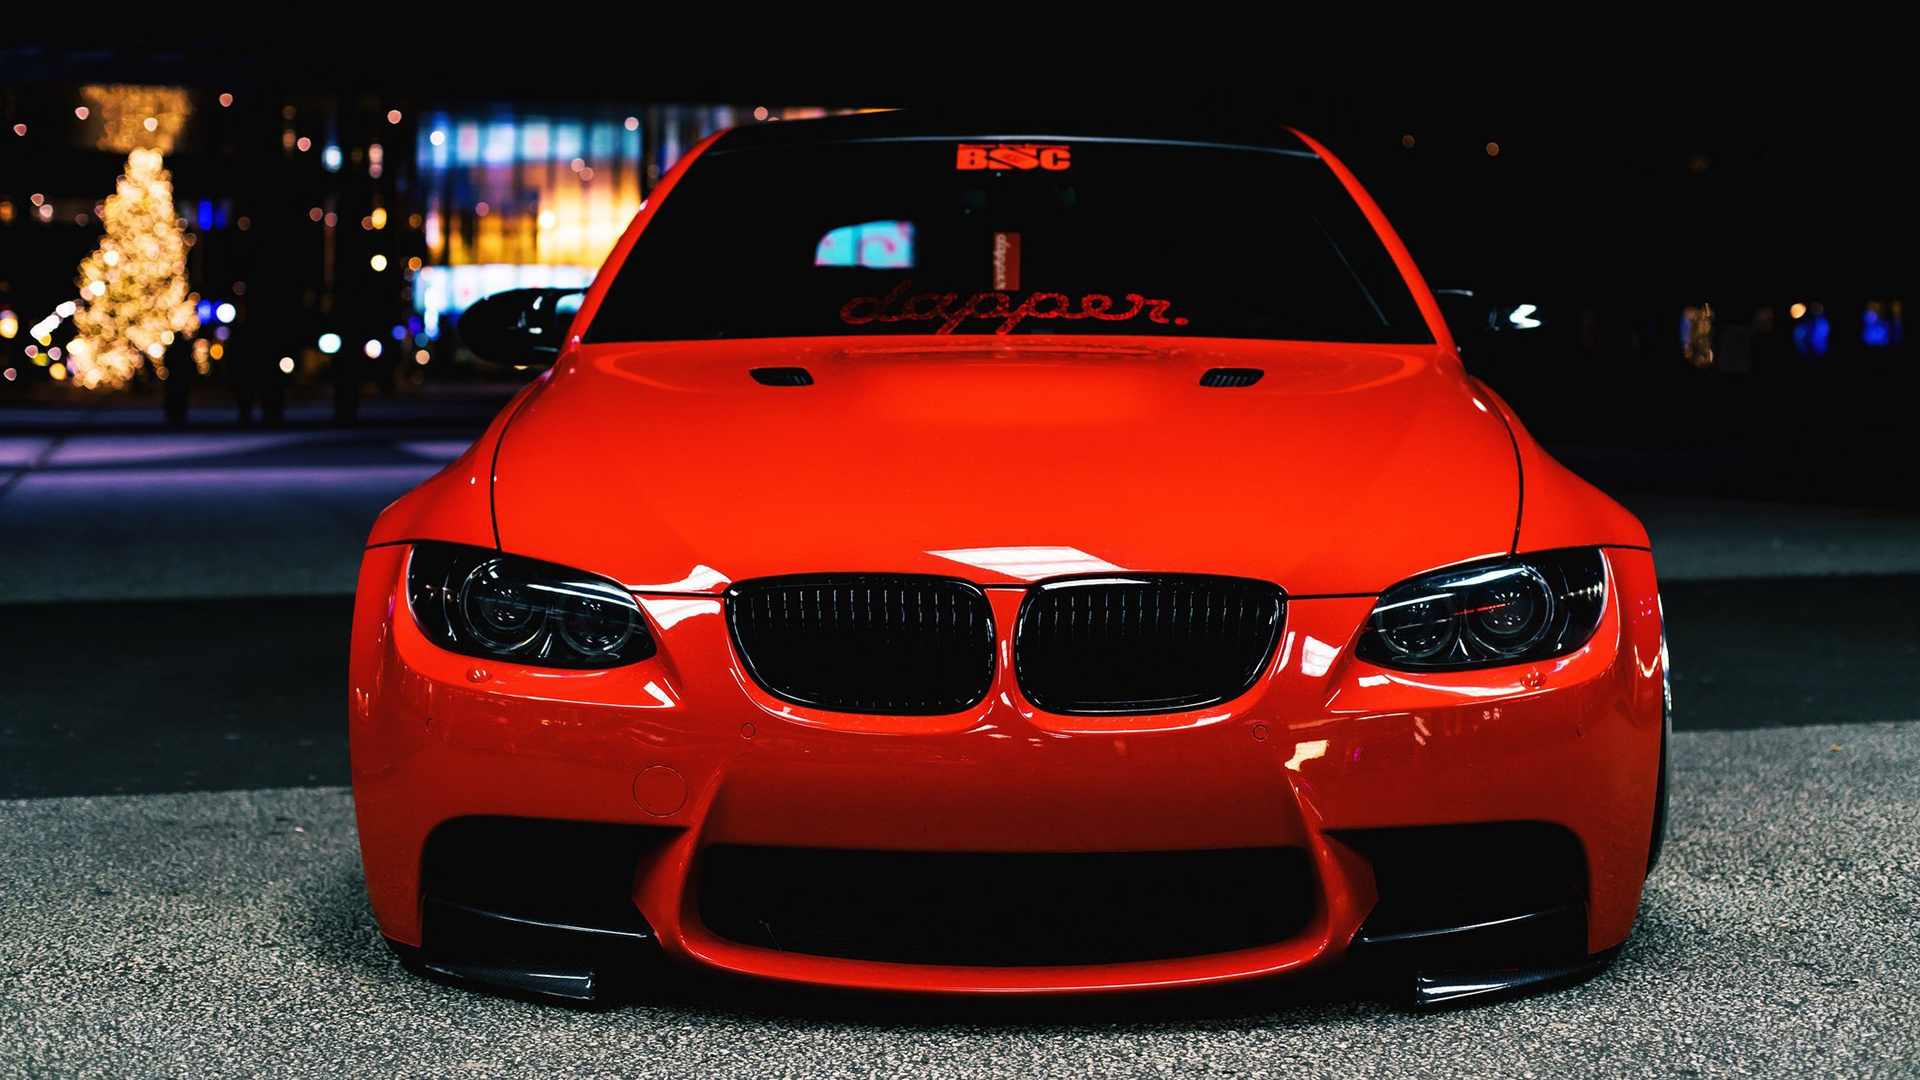 Download 1920x1080 bmw, cars, tuning, red bmw, bmw e91 touring, bmw e91  Wallpapers